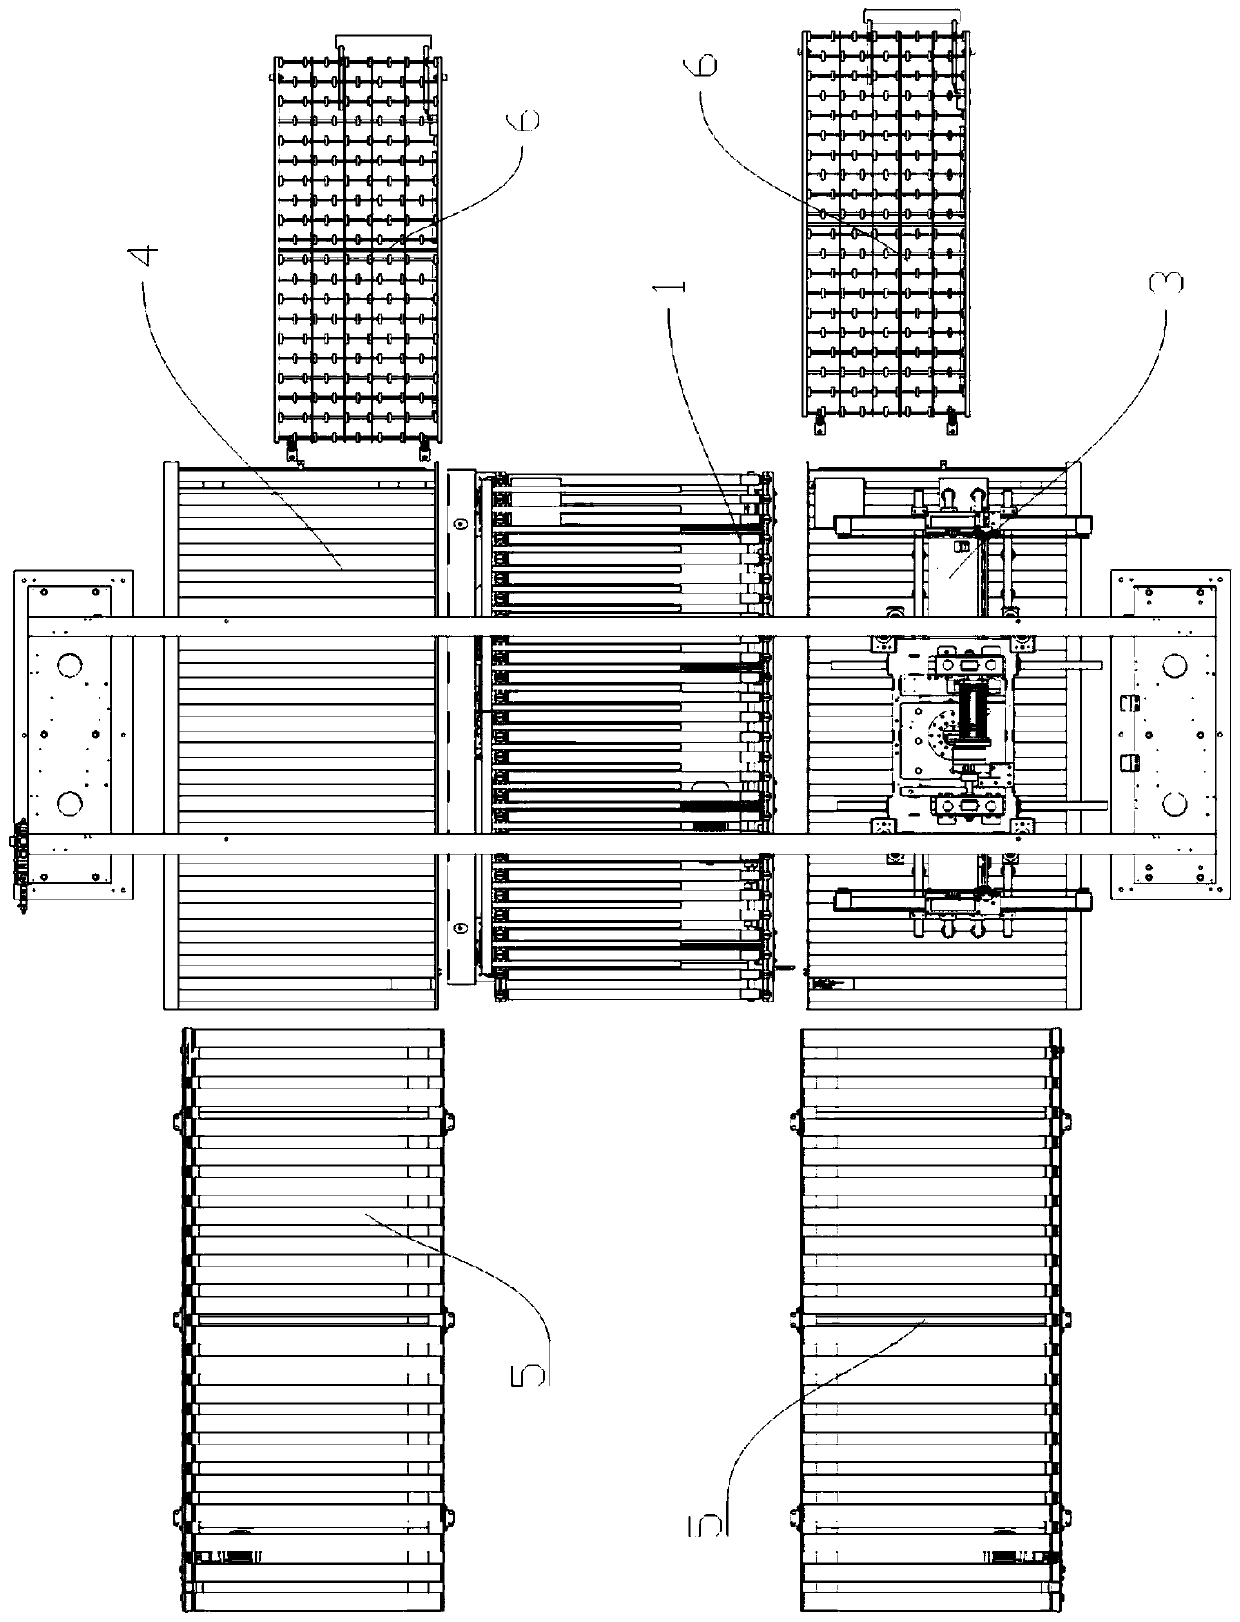 Technological method for double-station rapid loading of wood plates